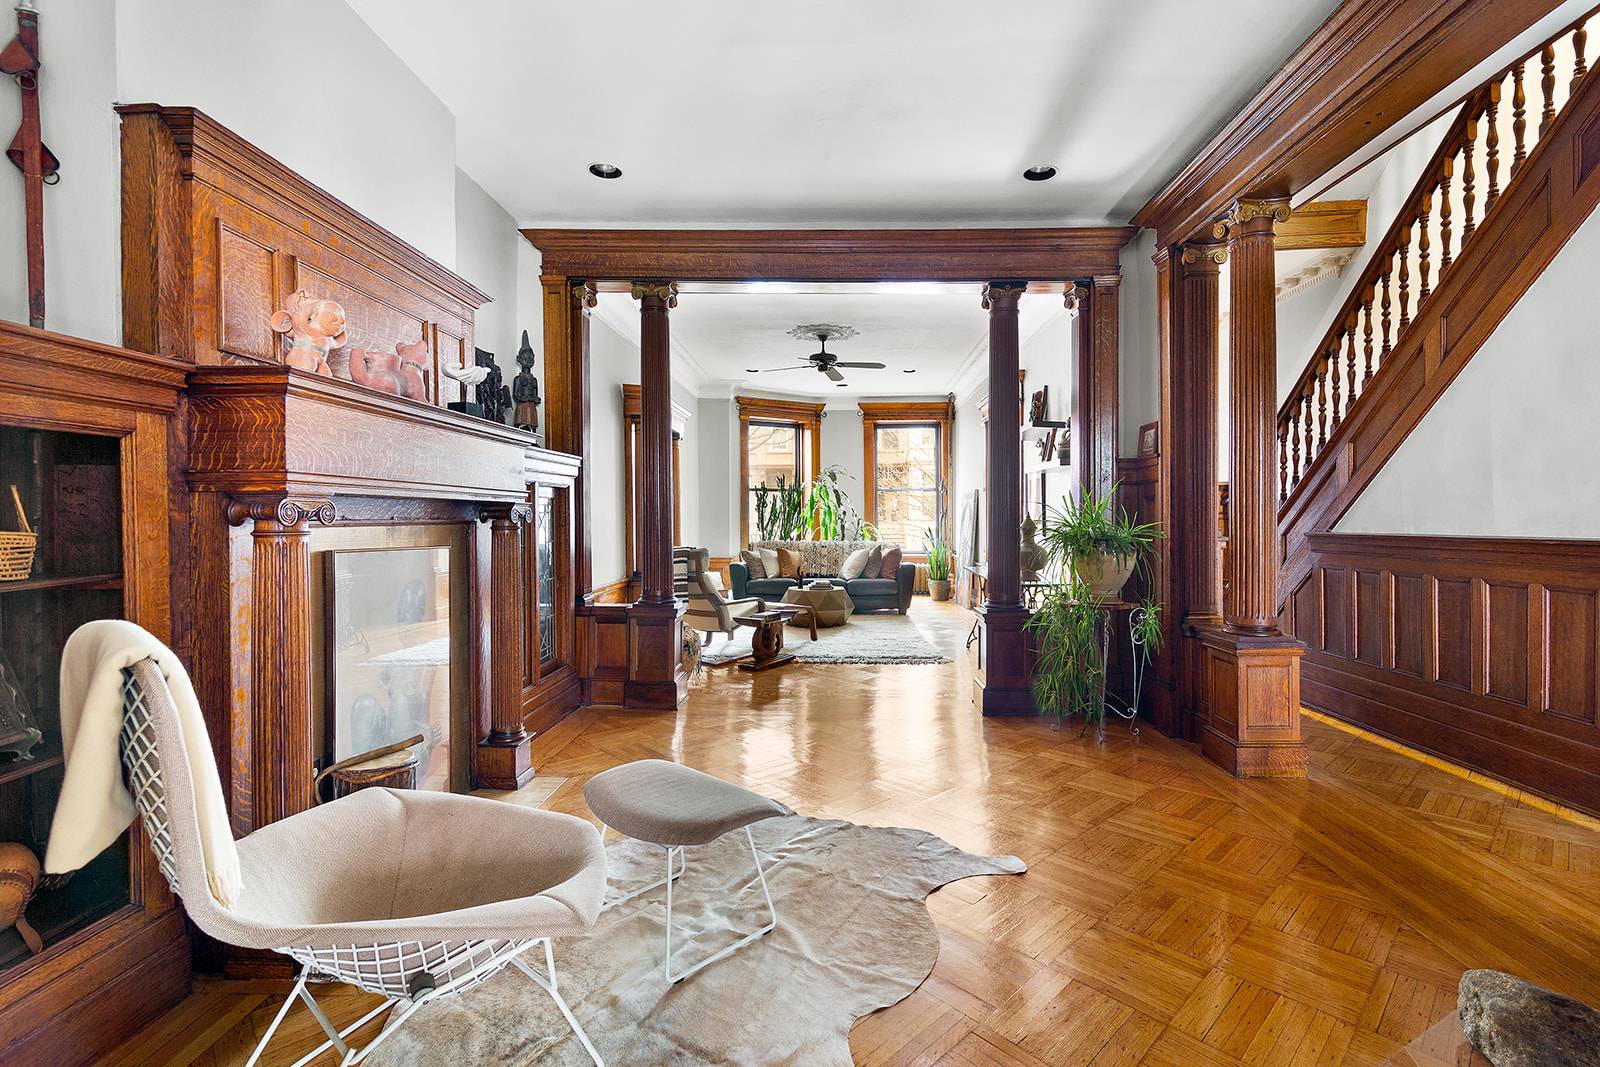 The beauty, heritage and spirit of Bedford Stuyvesant are on full display in this exceptional four story limestone mansion designed and built by husband and wife team, Carrie and Frederick ...